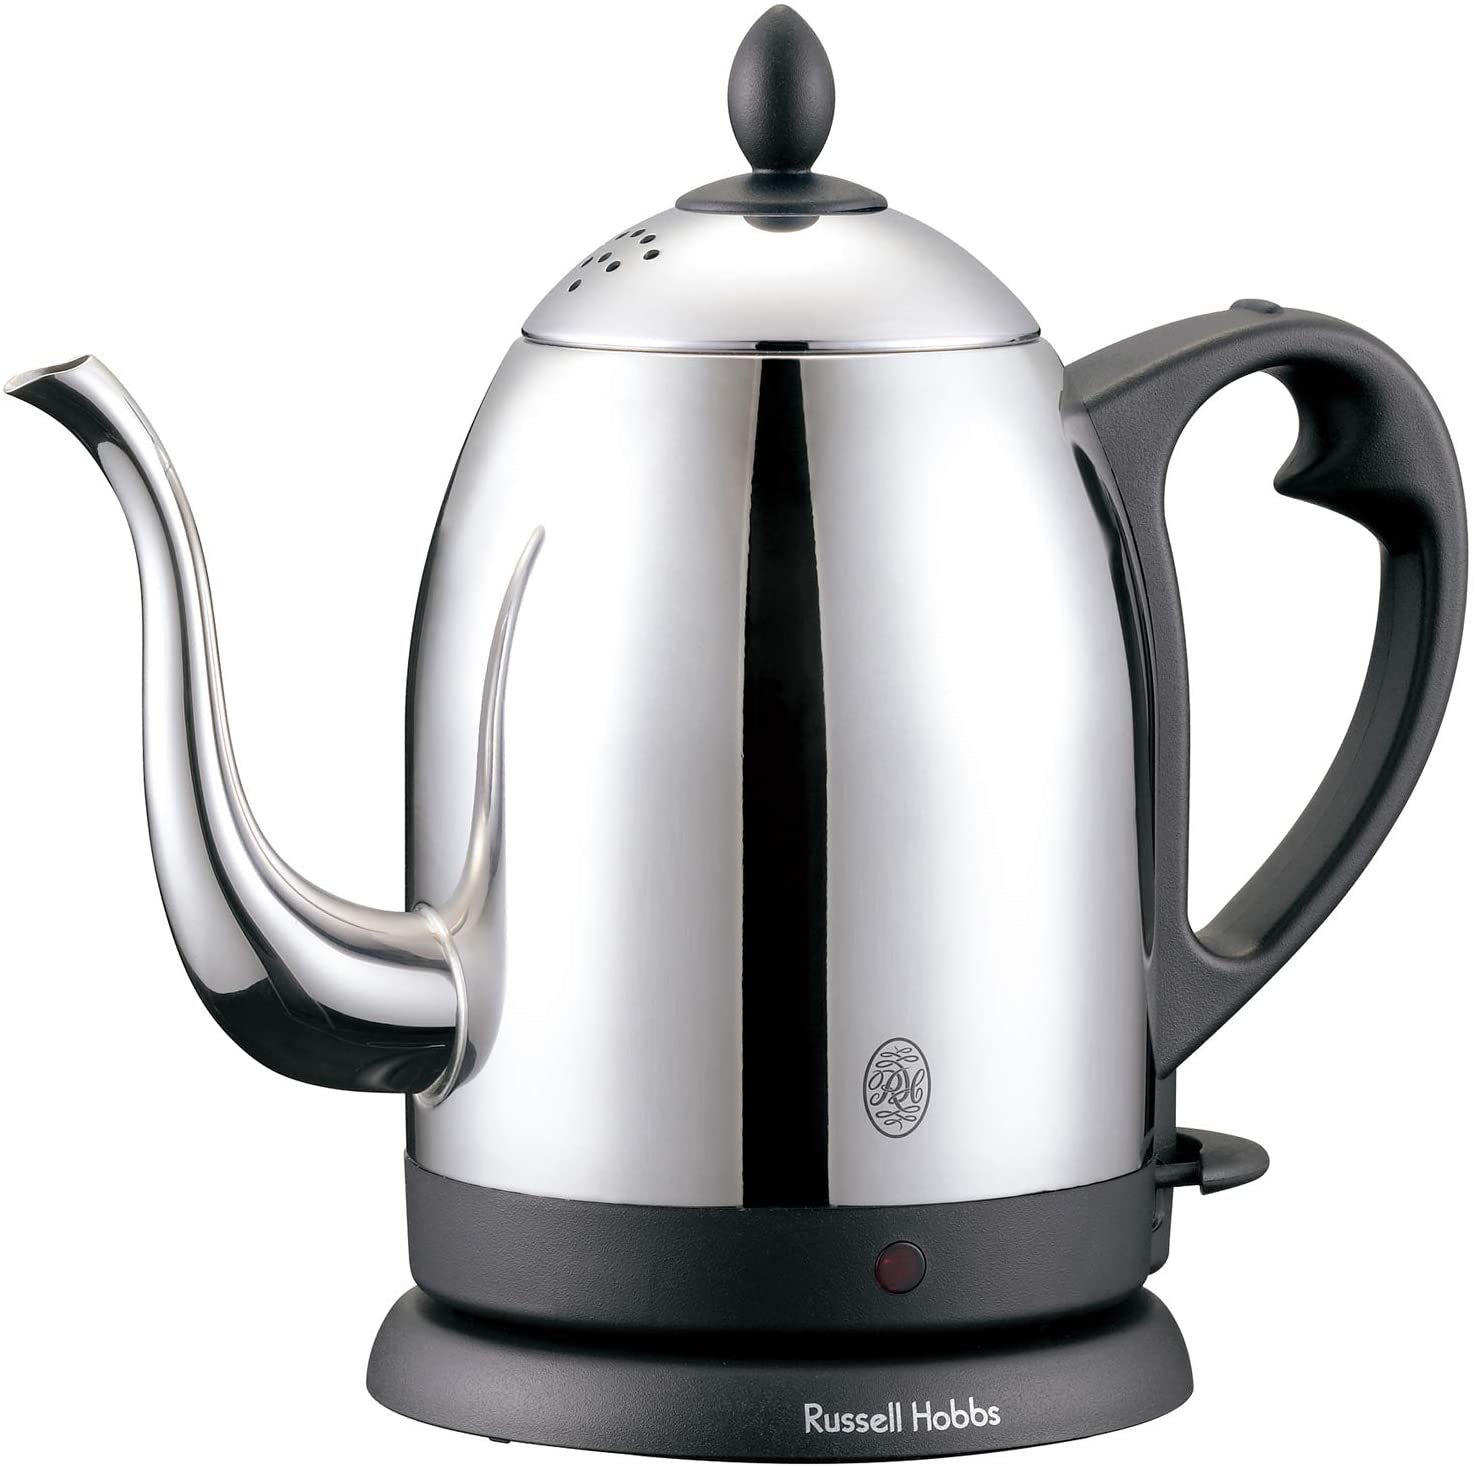 Russell Hobbs(ラッセルホブス) Cafe Kettle 7410JPの商品画像サムネ1 